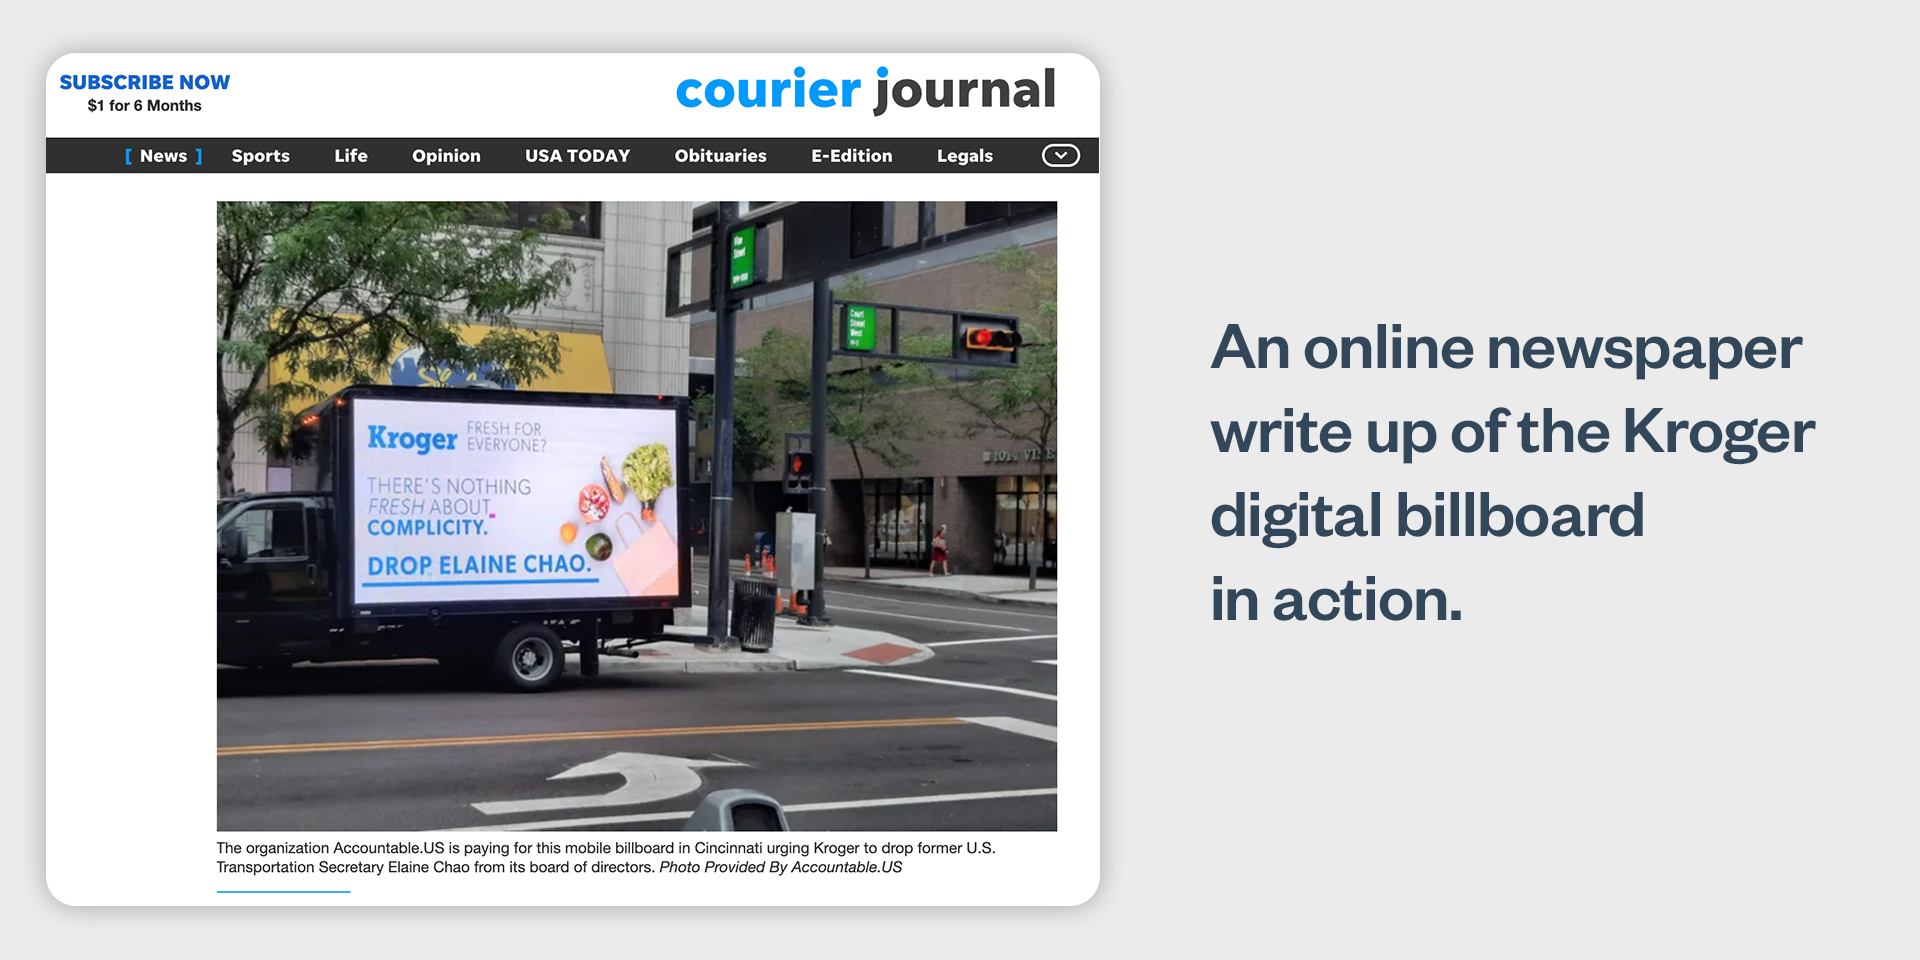 Explainer of the online newspaper coverage that features a photo of the digital billboard for Kroger to drop Elaine Chao.